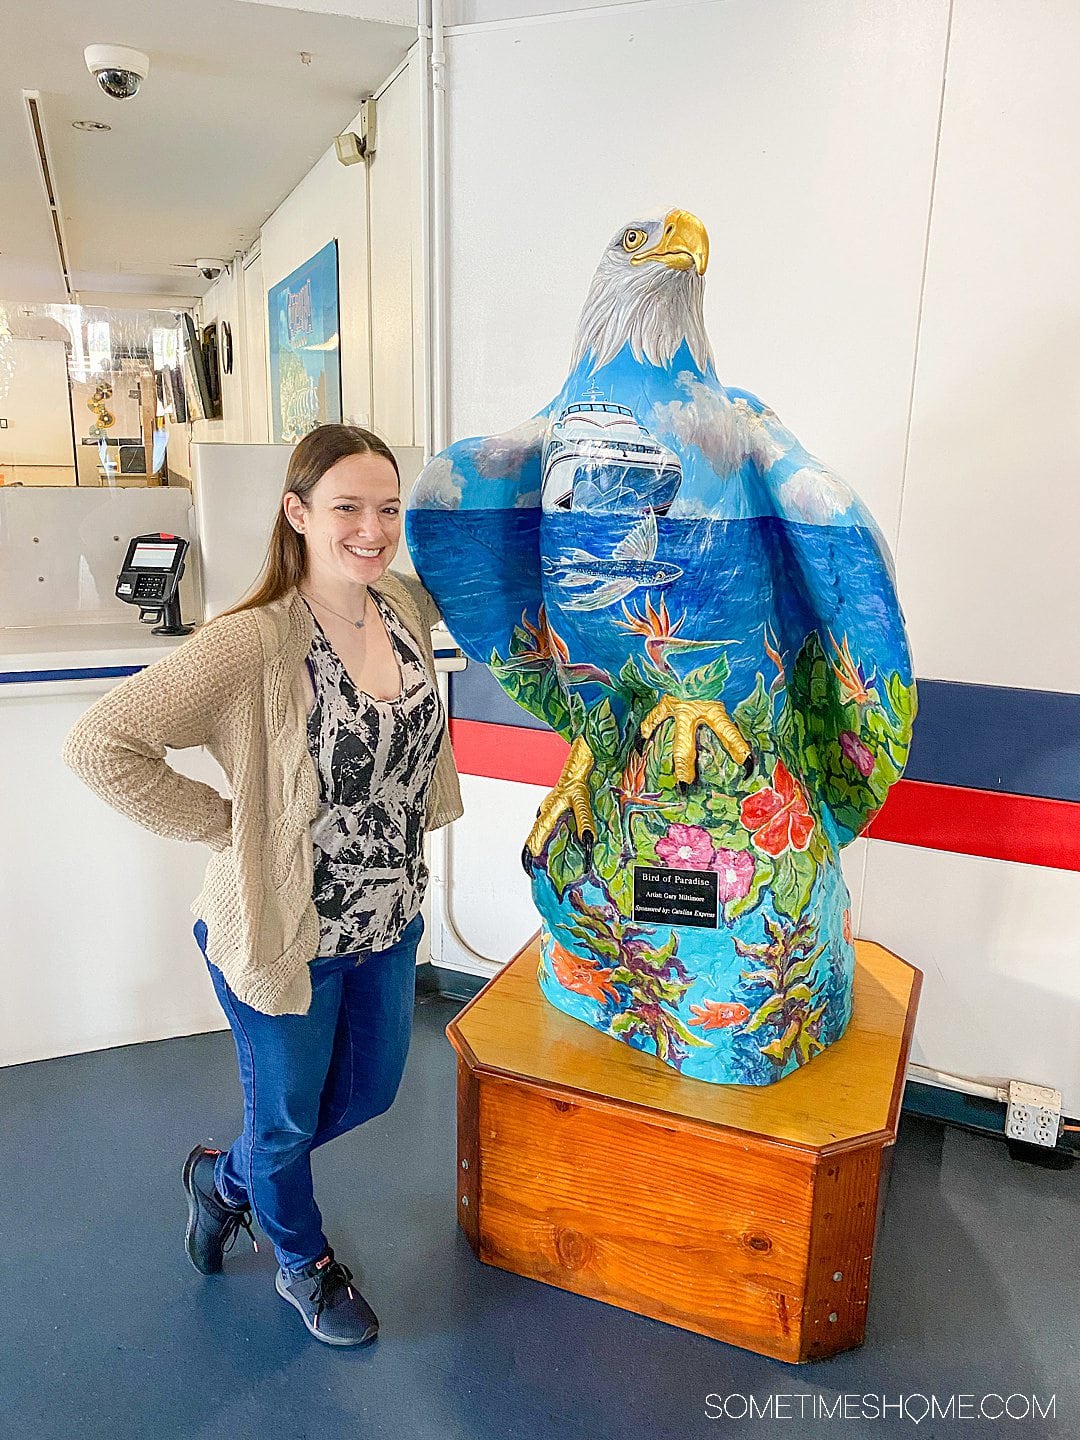 Woman standing next to a large sculpture of a bald eagle, colorfully painted with a California scene from Catalina Island.